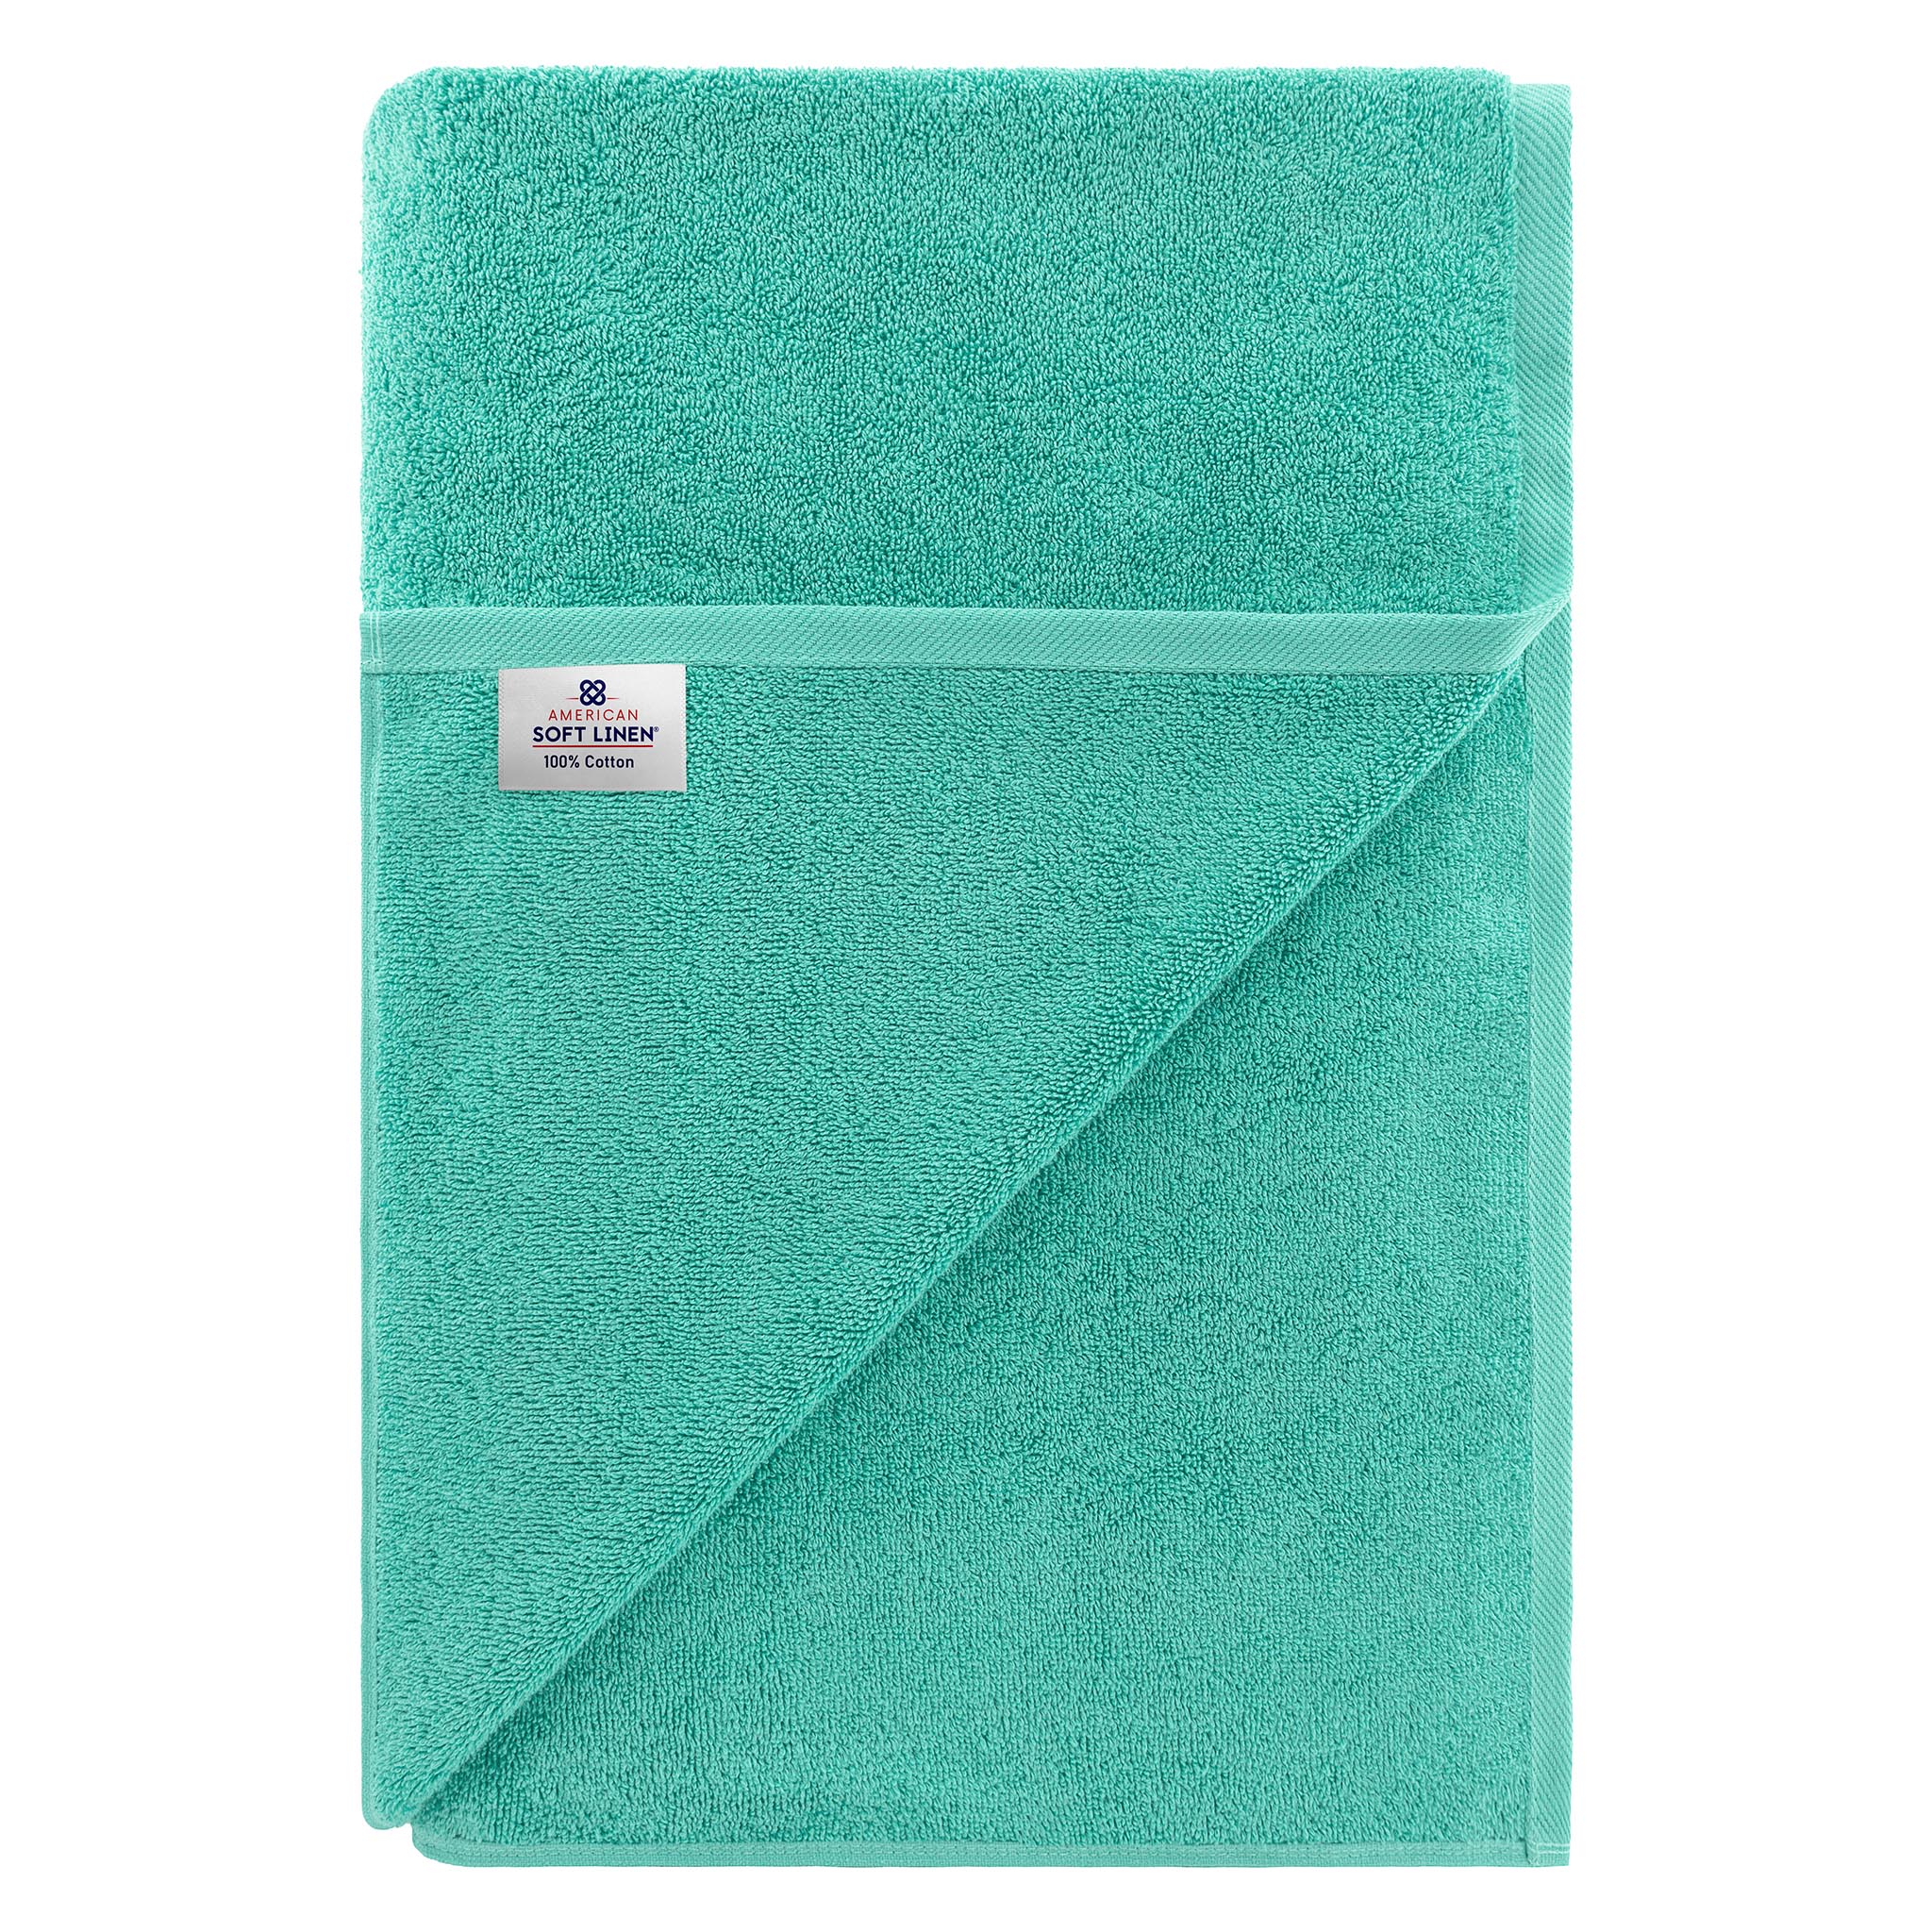 American Soft Linen 100% Ring Spun Cotton 40x80 Inches Oversized Bath Sheets turquoise-blue-7